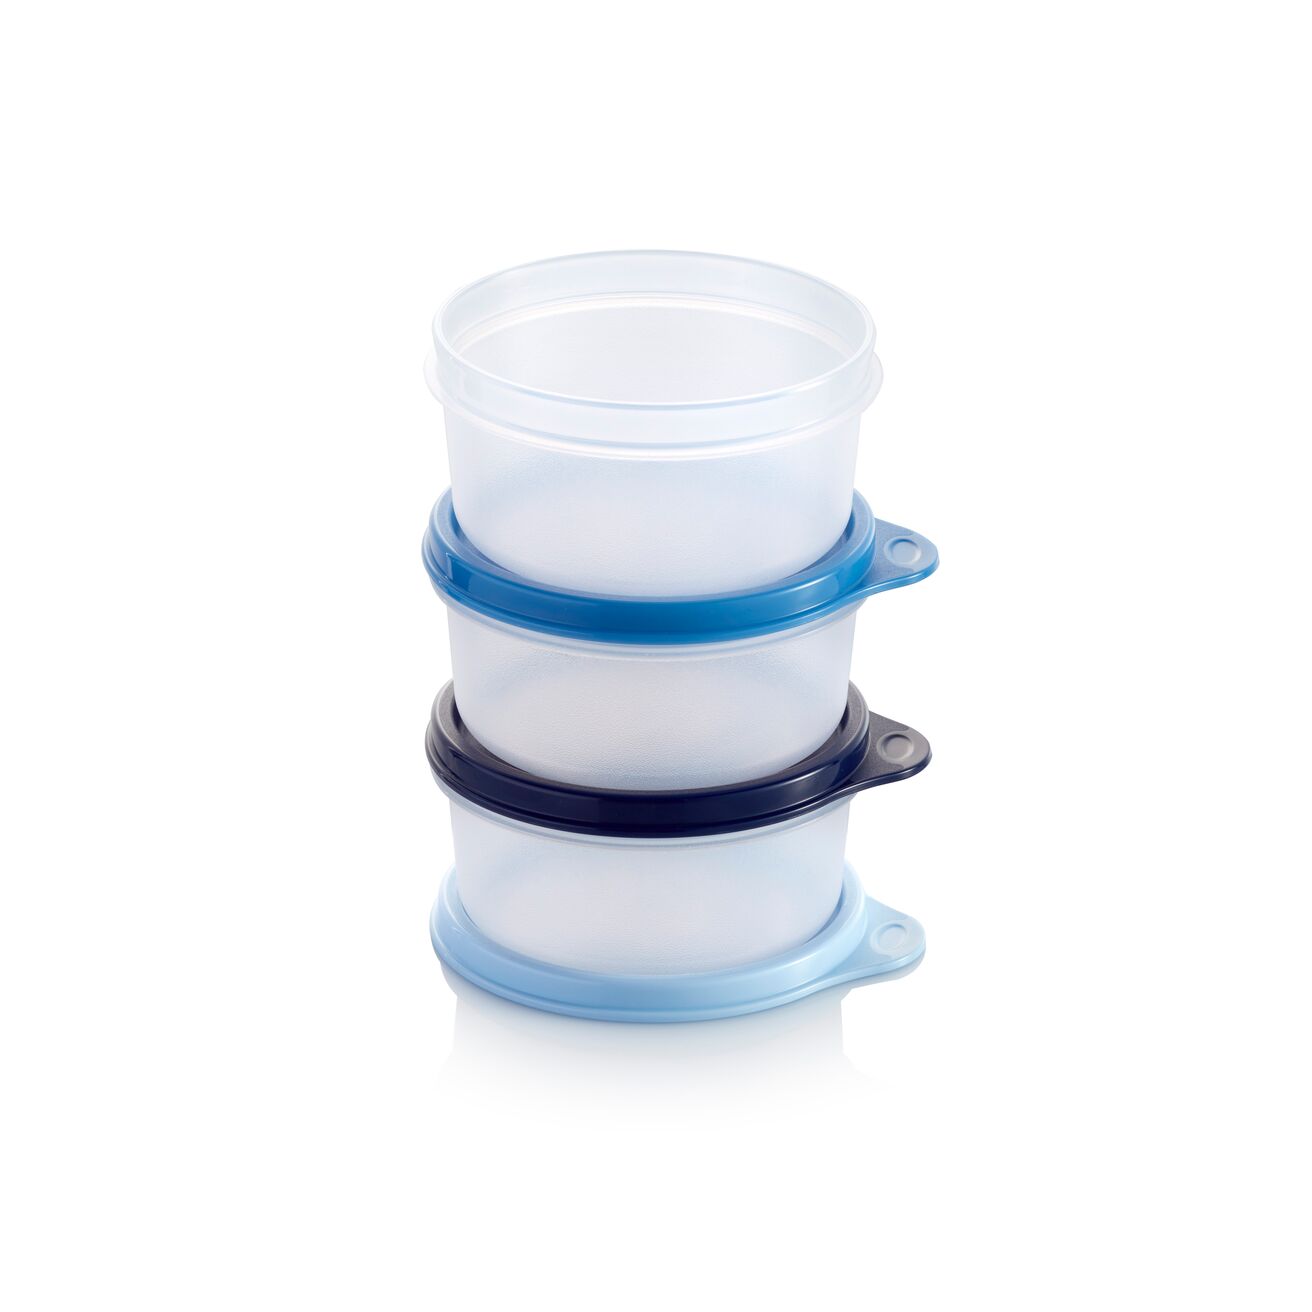 Serving Cups 200 ml (3)